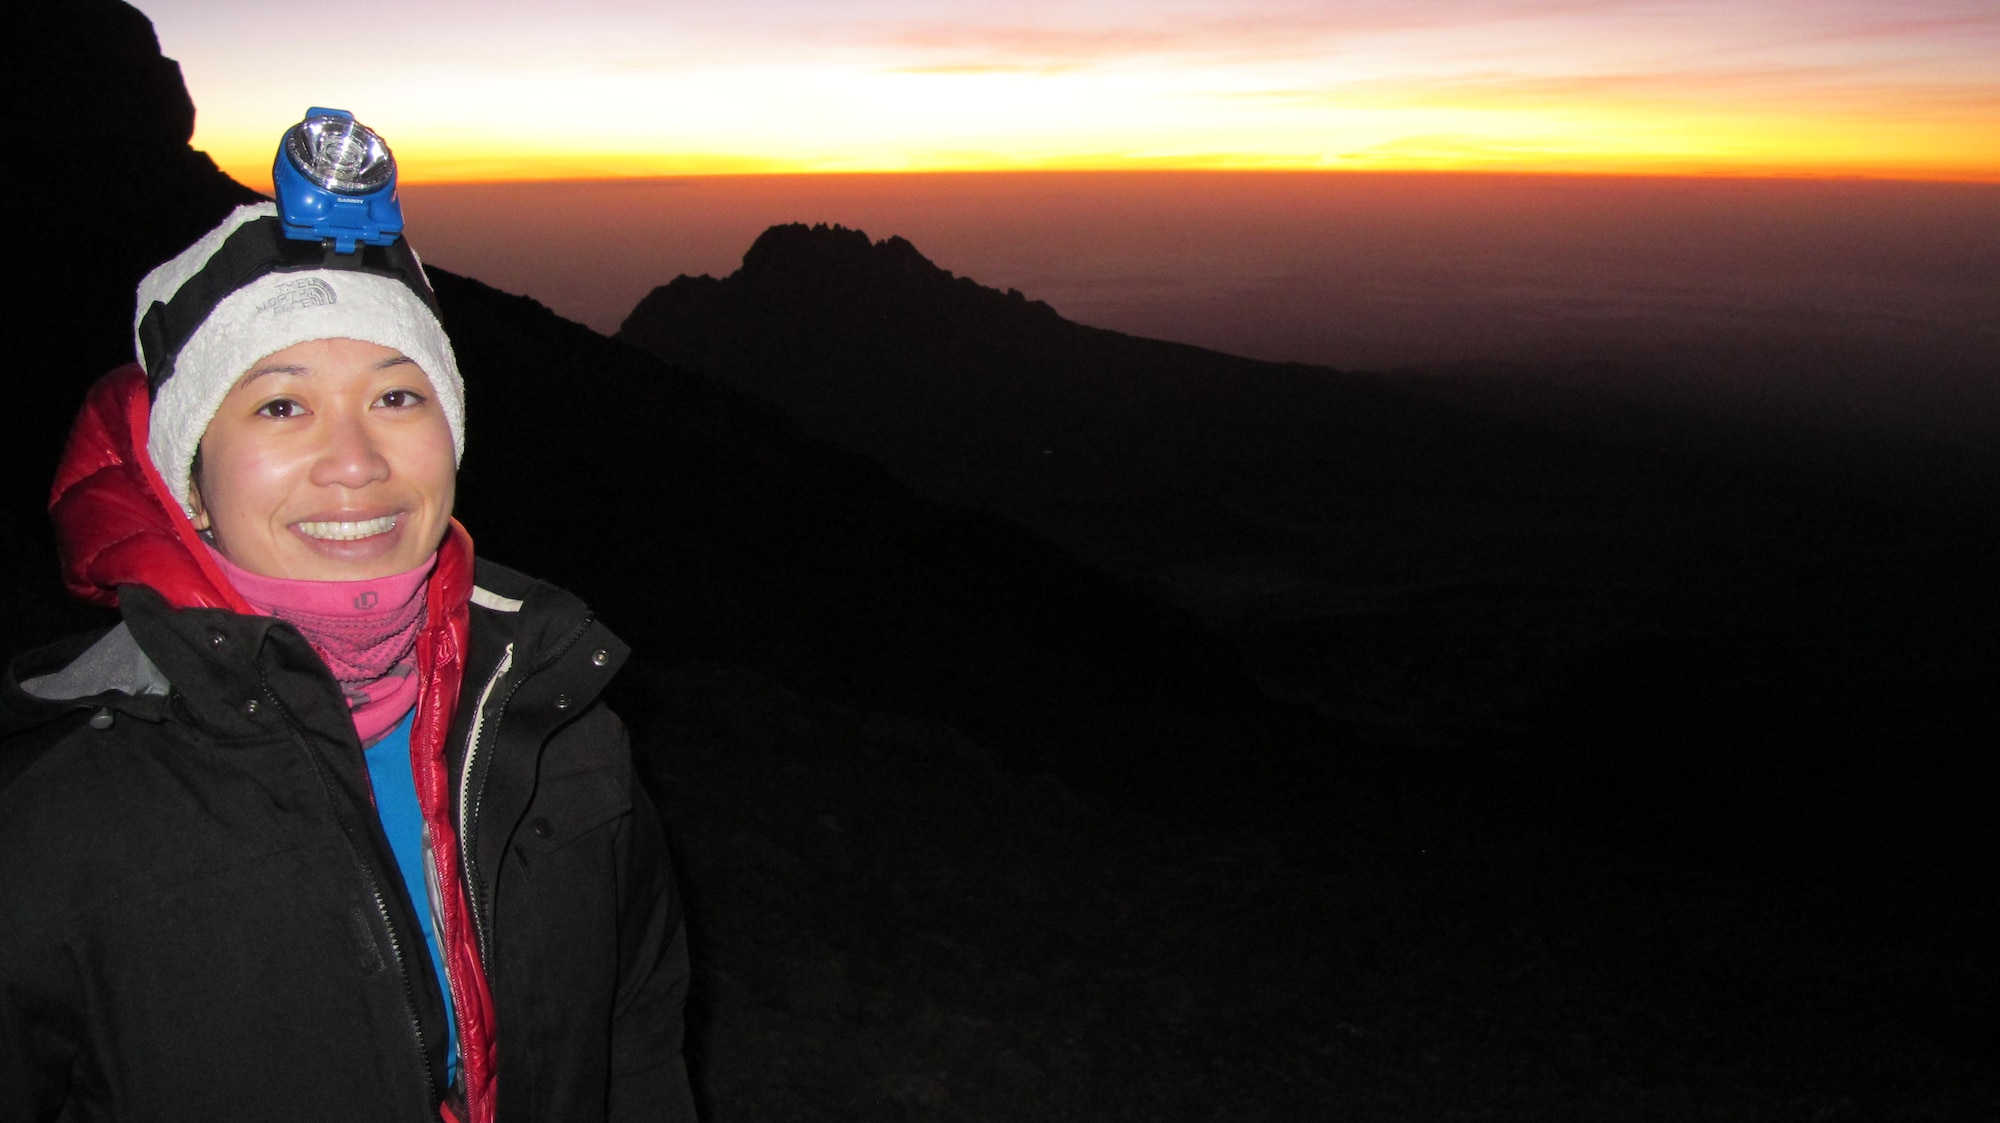 1st Lt. Diana Wong, assigned to the 509th Force Support Squadron at Whiteman Air Force Base, Mo., takes a moment to appreciate the sunrise on Mount Kilimanjaro in Tanzania, Feb. 11, 2013. On the last day of the hike, the group set off at 11:30 p.m. to make it to the peak nine hours later to catch the view. (Courtesy photo/Released)